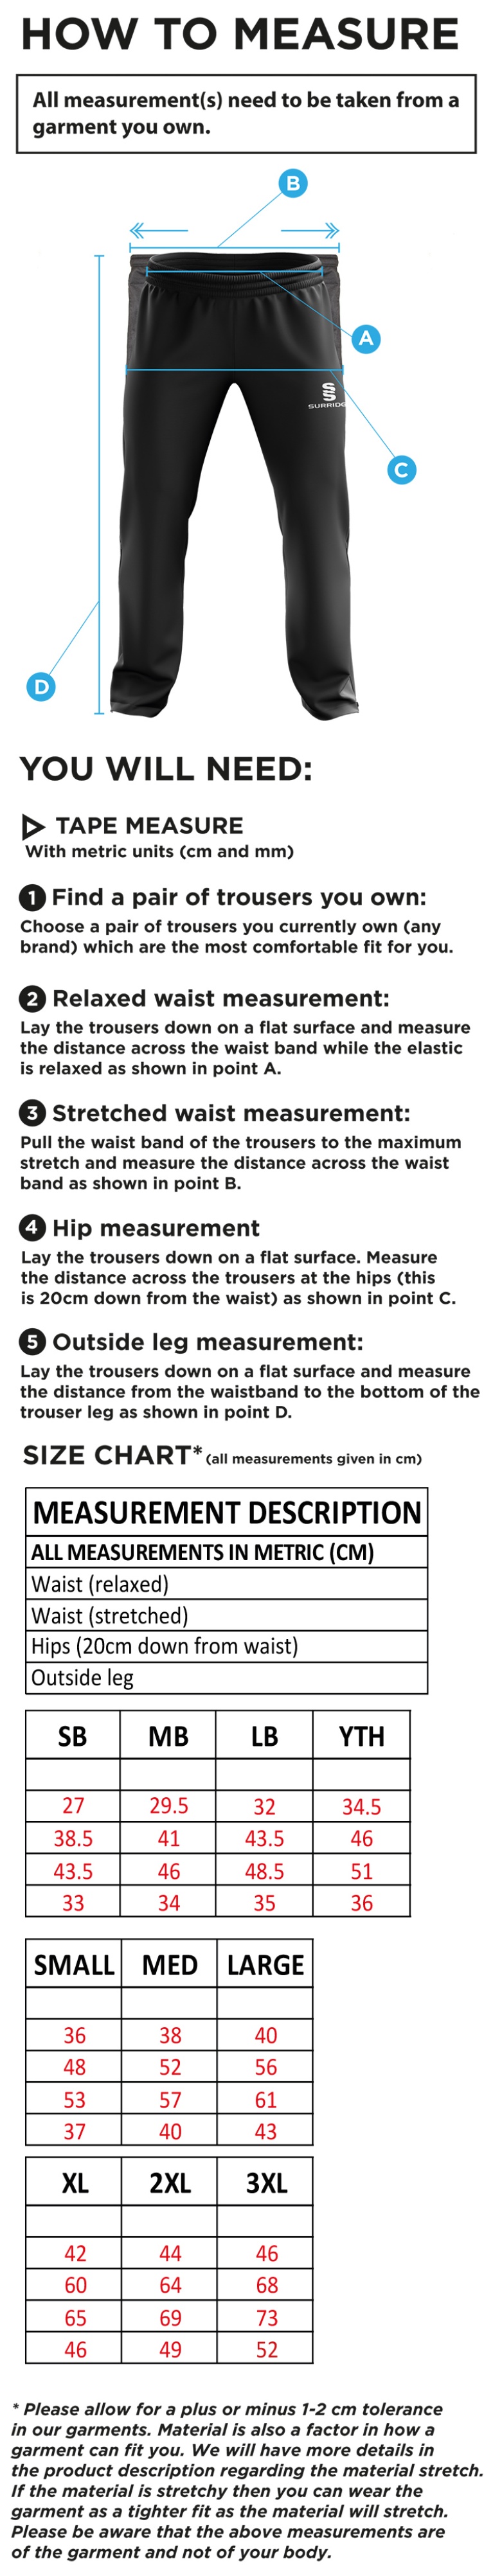 Moldgreen Rugby Club Ripstop Track Pant - Size Guide